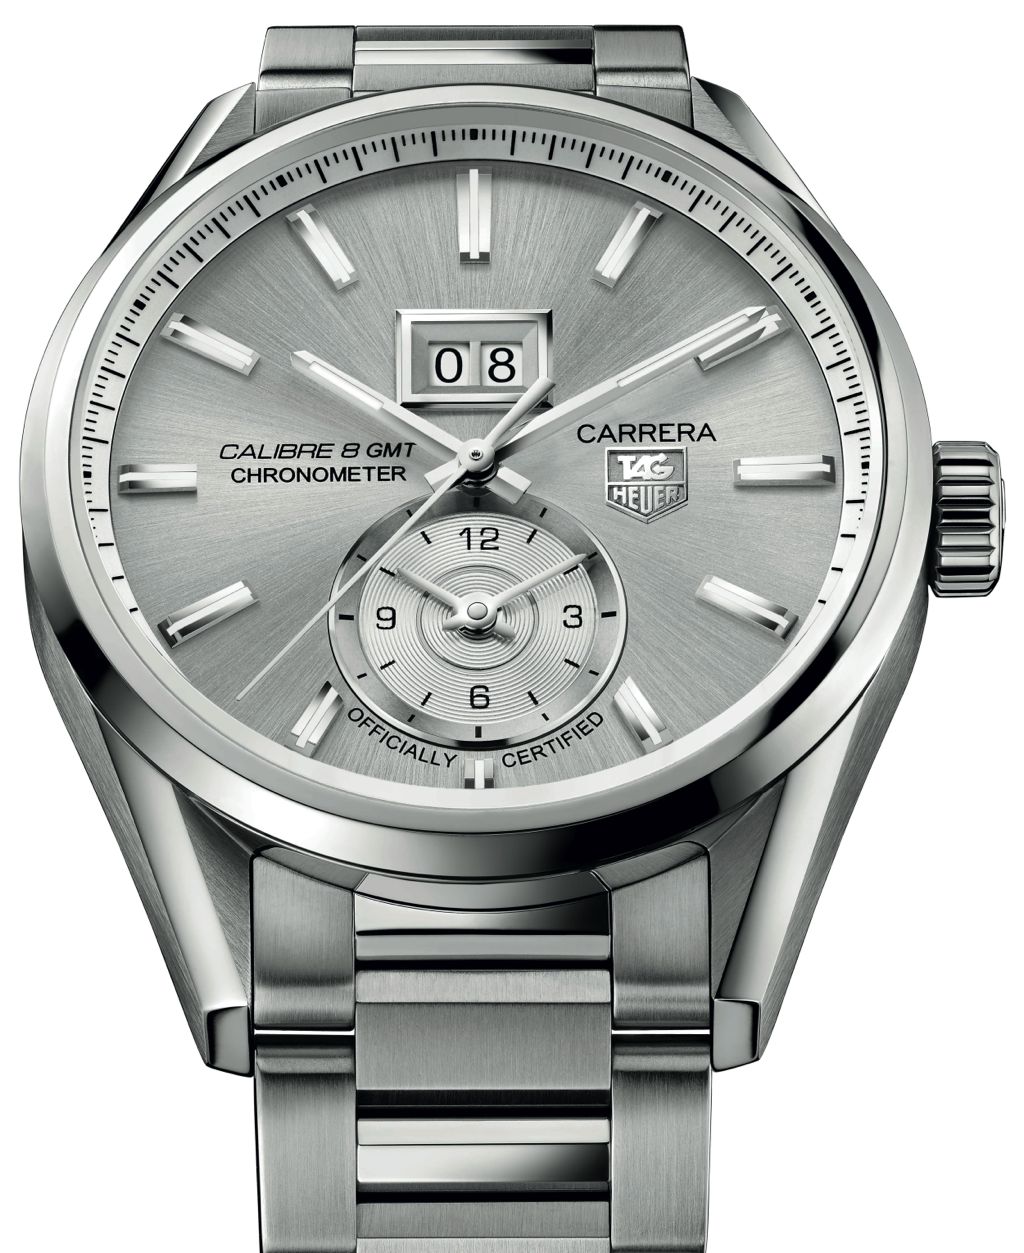 Tag-Heuer-Watches